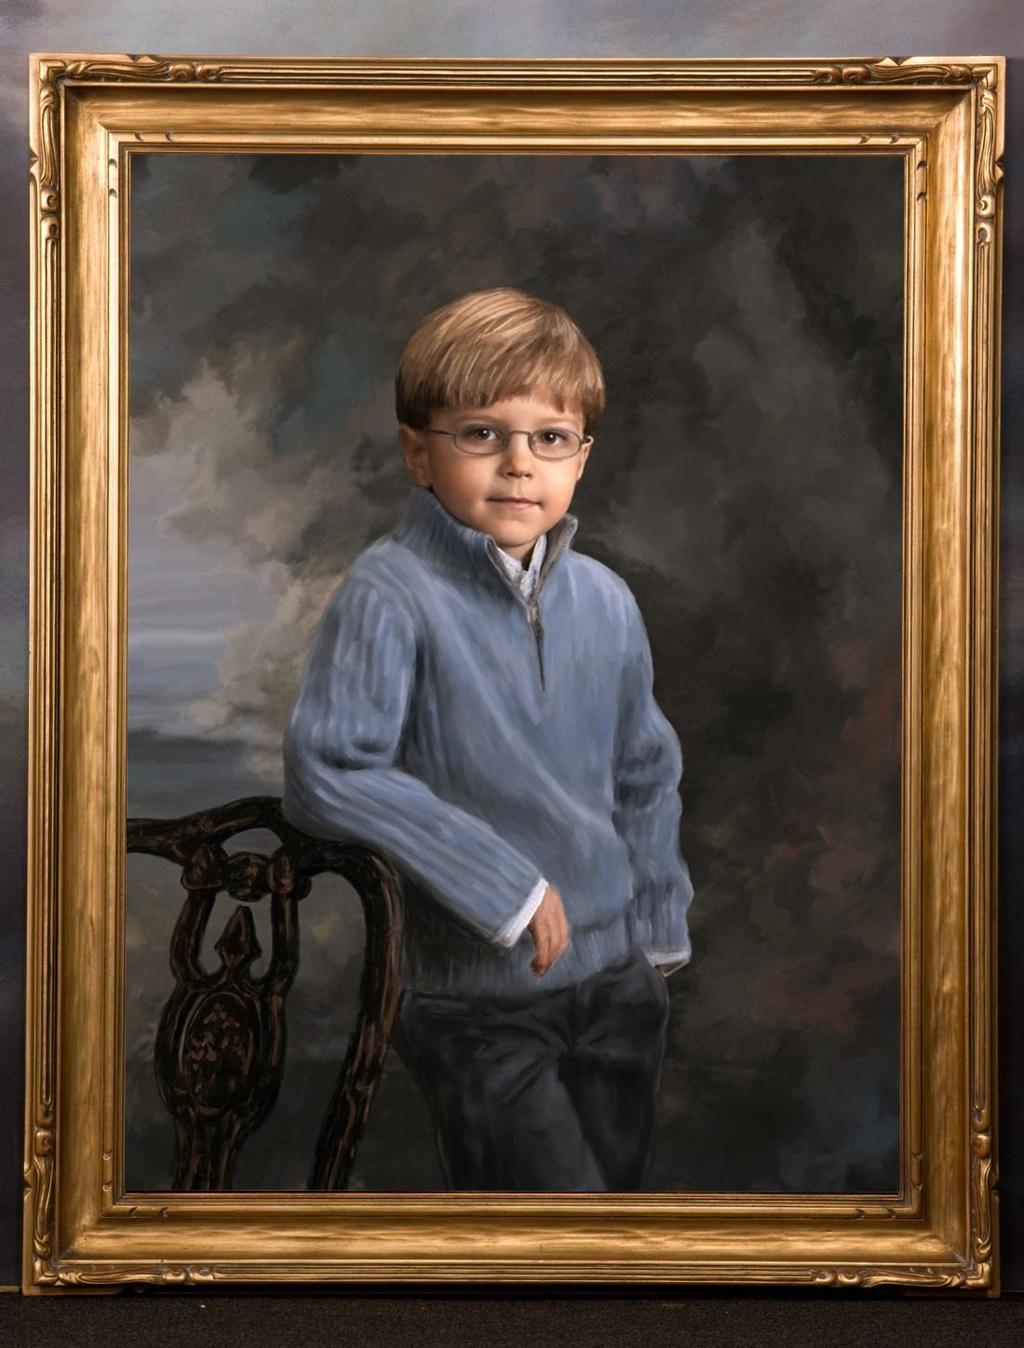 A few words about Kramer Portraits, Le Petite Studio Kramer Portraits is proud to donate a Gift Certificate for a 14 inch Masterpiece Portrait on canvas, to be photographed at our studio at our